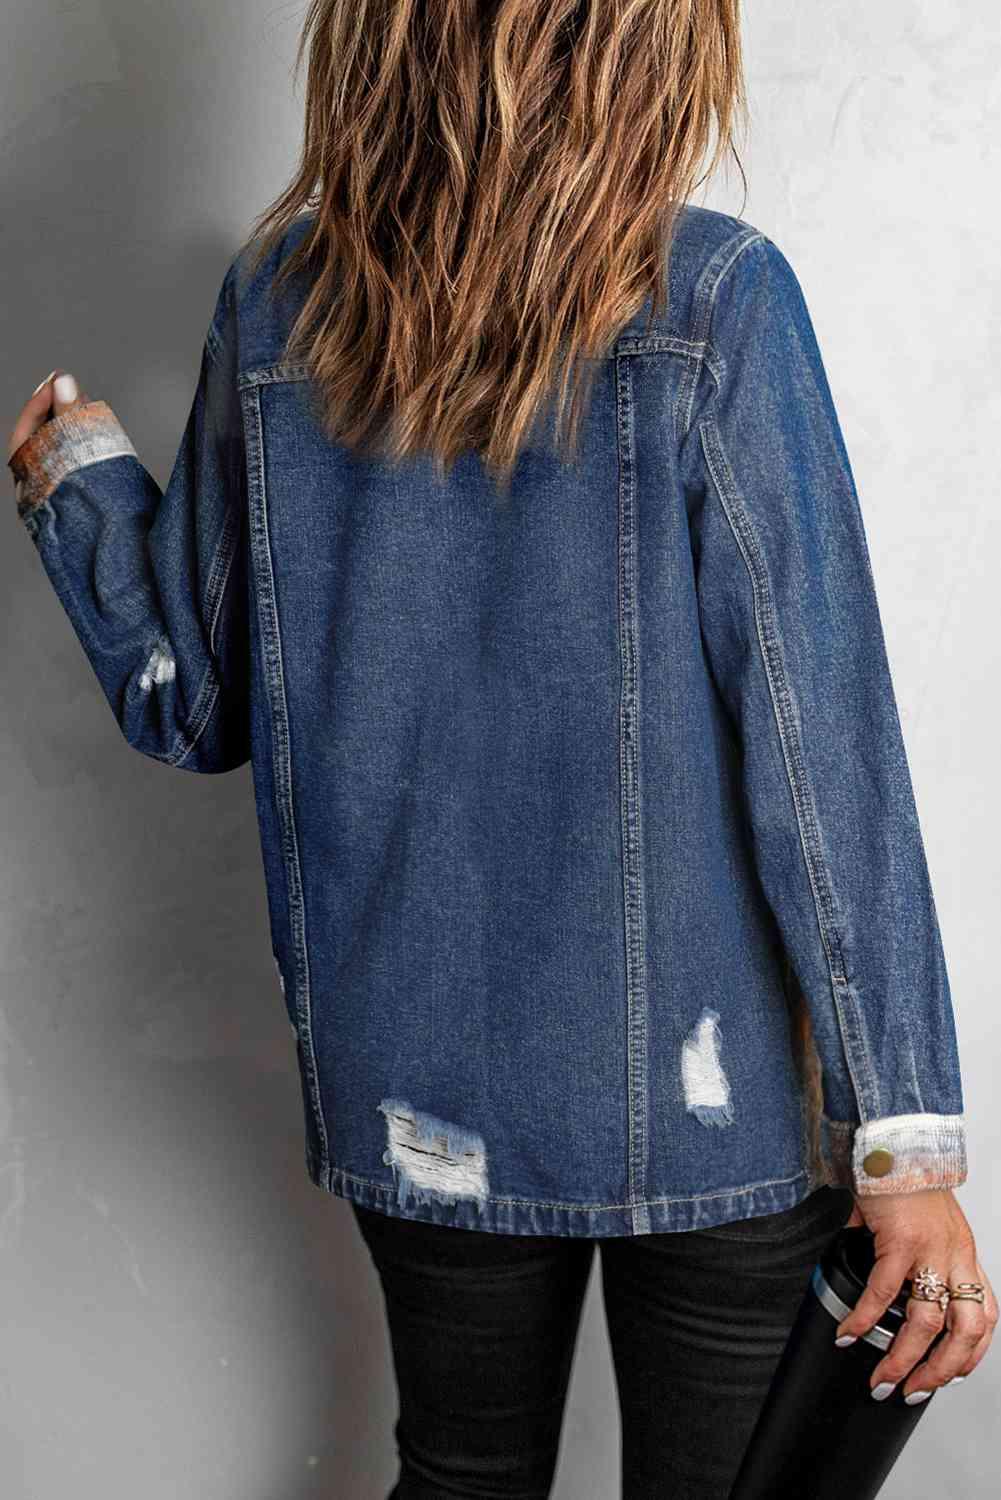 a woman with long hair wearing a jean jacket